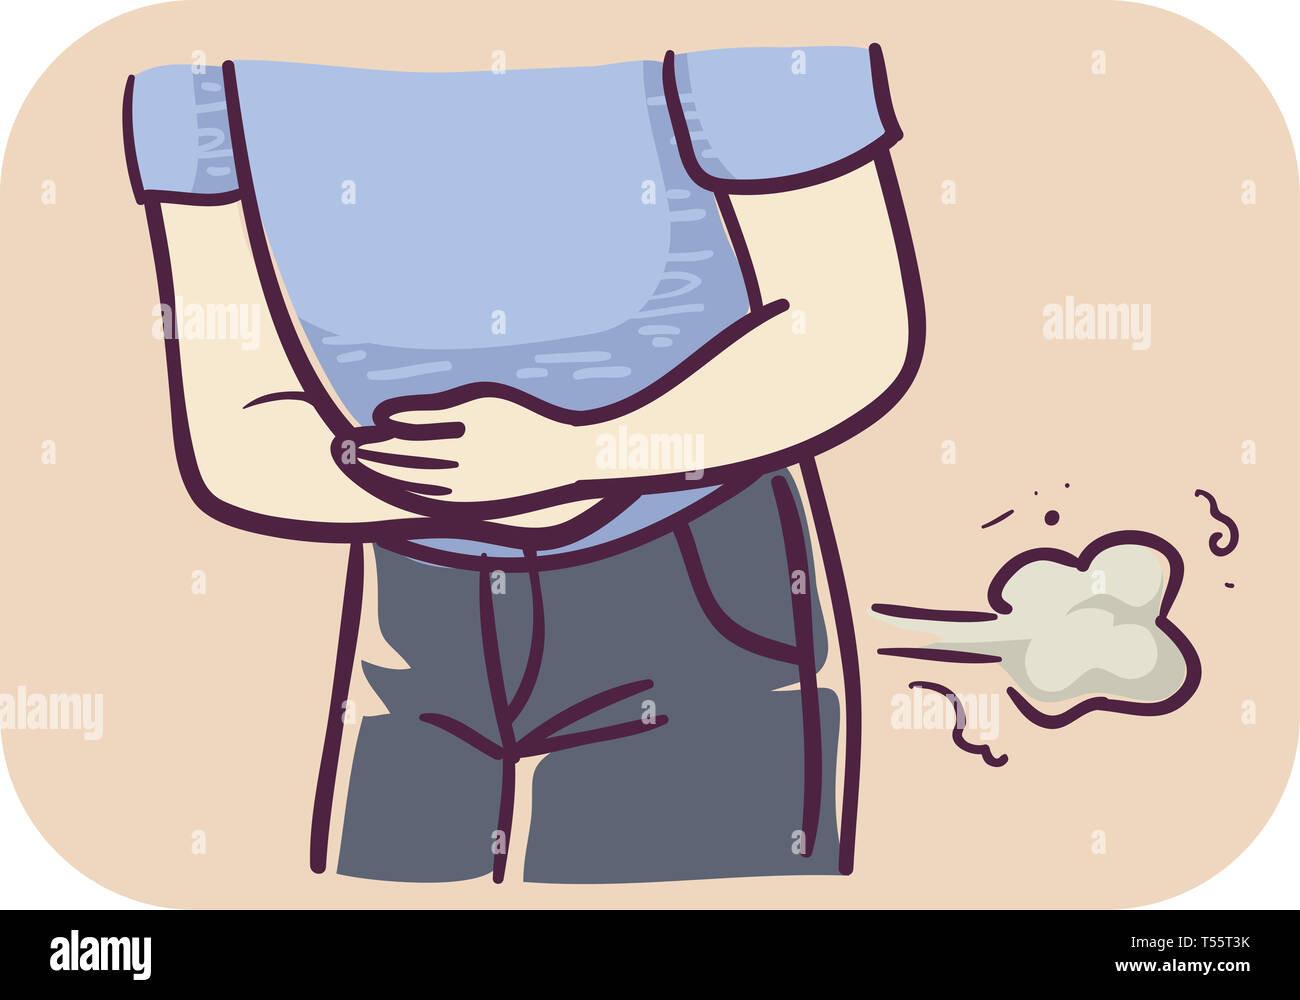 Illustration of a Man Holding His Hurt Tummy and Farting Stock Photo